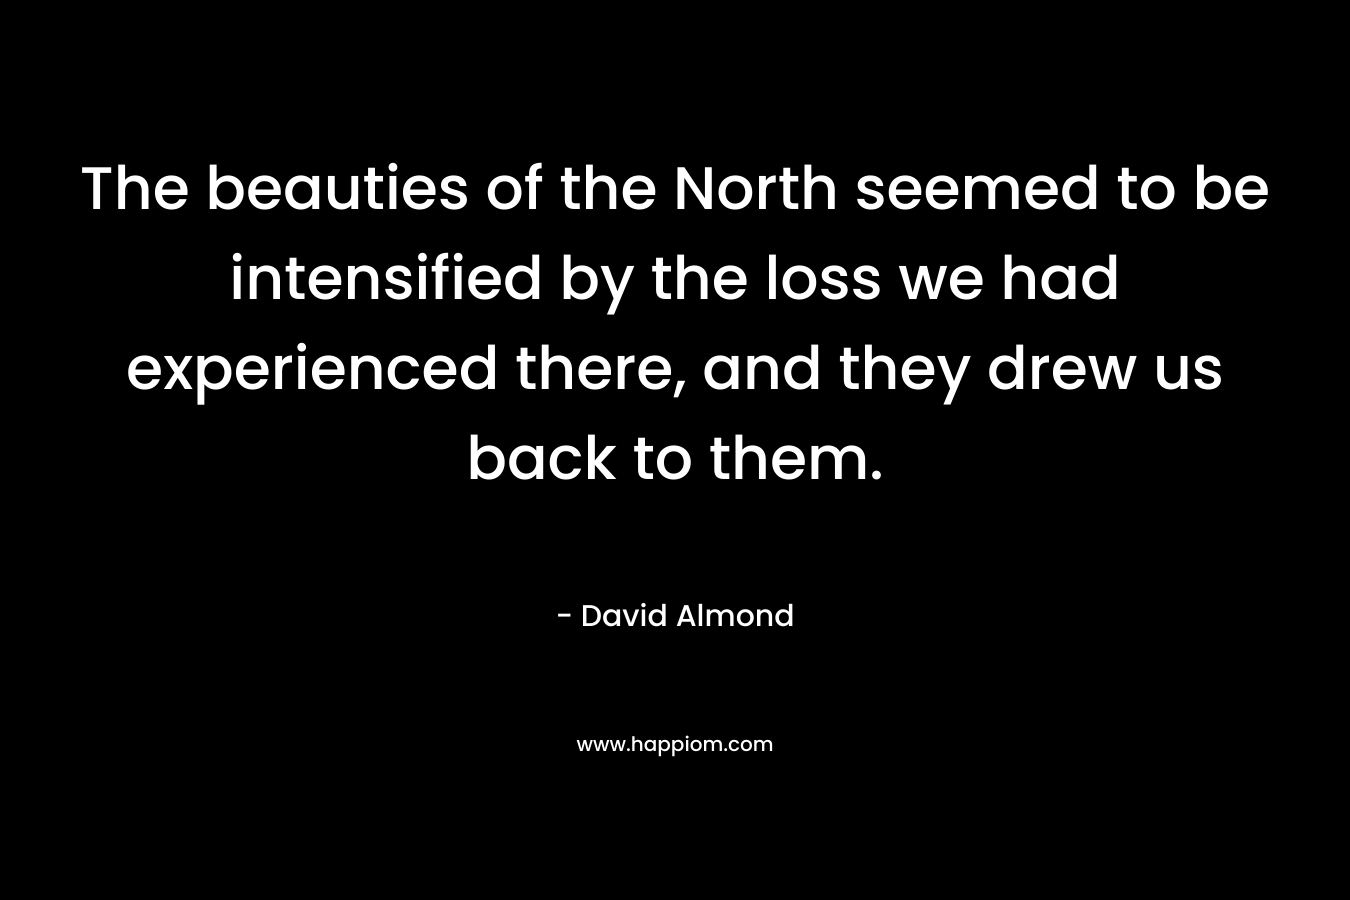 The beauties of the North seemed to be intensified by the loss we had experienced there, and they drew us back to them.